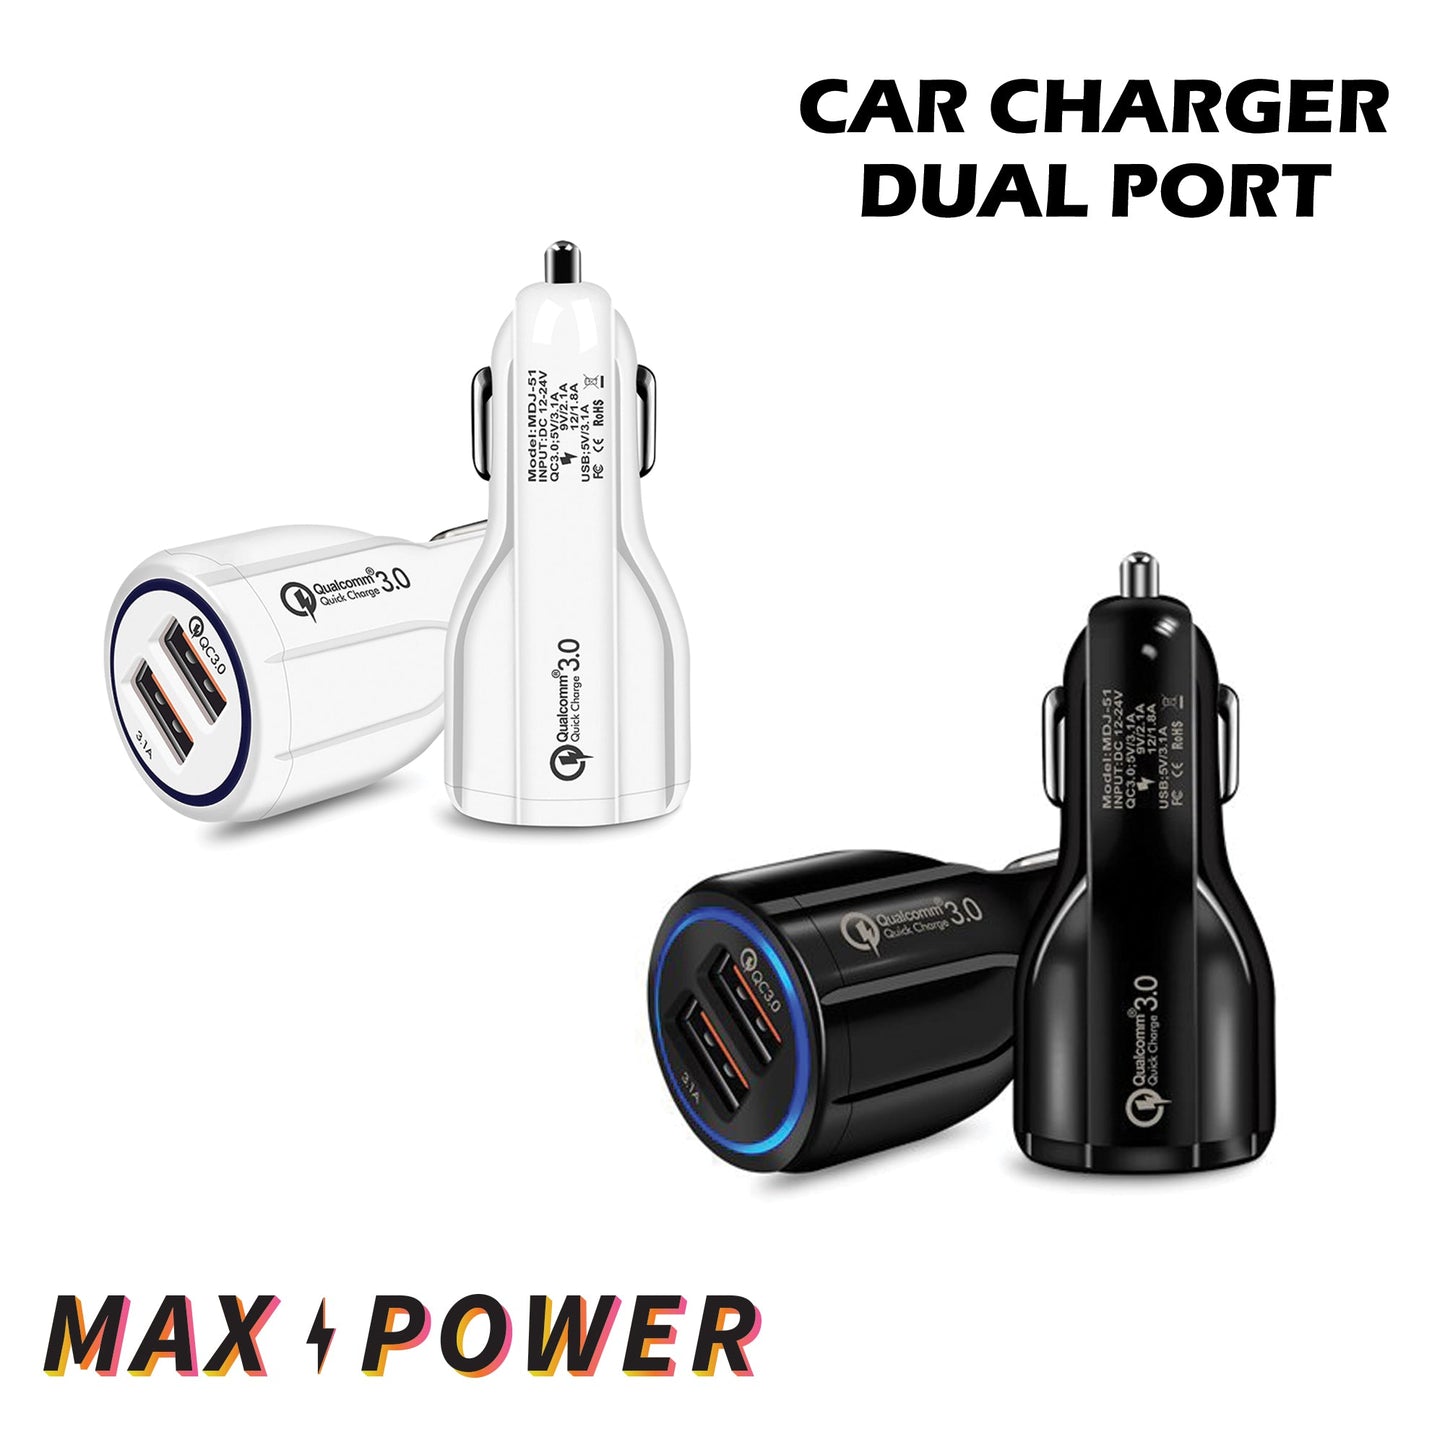 Max Power - Car Charger Dual Port Ace Trading Canada